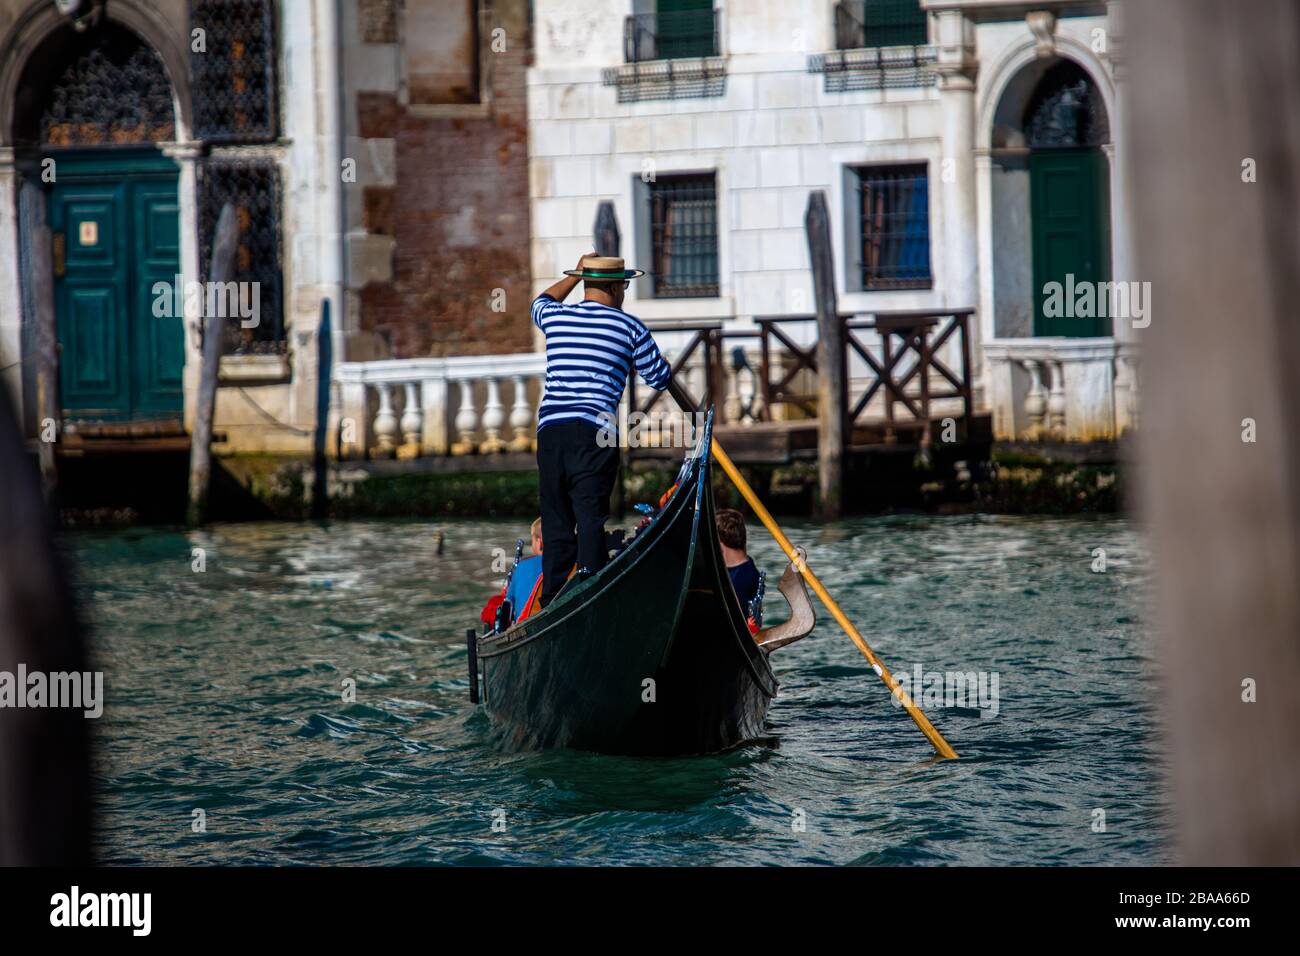 A gondolier taking a couple of tourists across the grand canal before Italy announced quarantine measures, Venice, Italy. Stock Photo